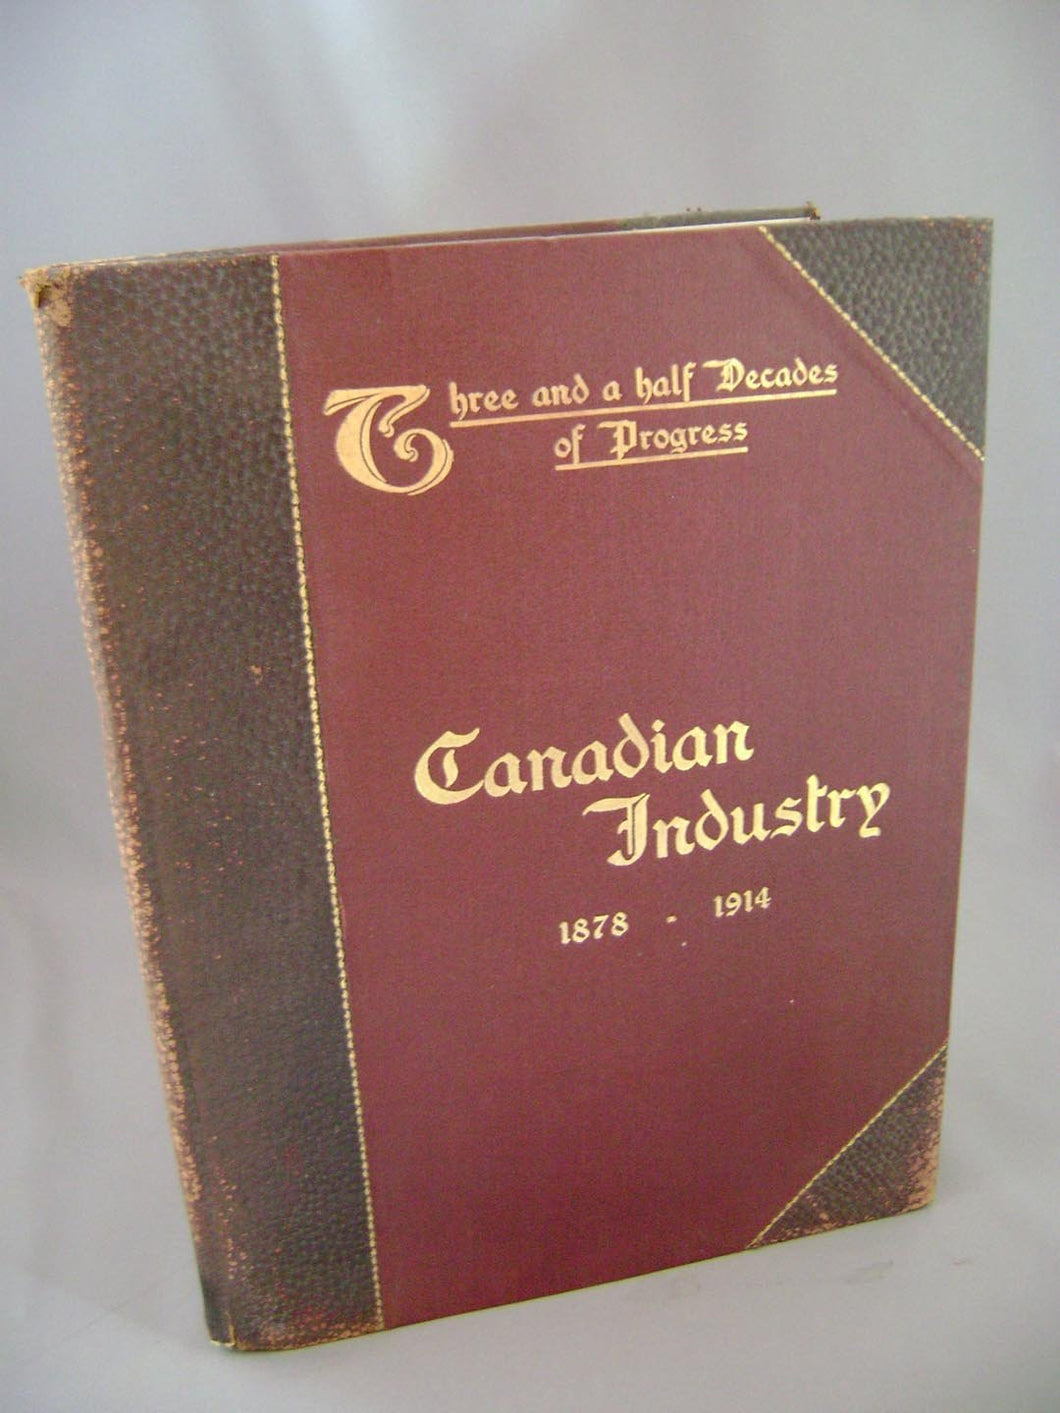 Canadian Industry: Three and One-half Decades of Industrial Progress 1878-1914 (Salesman's dummy)